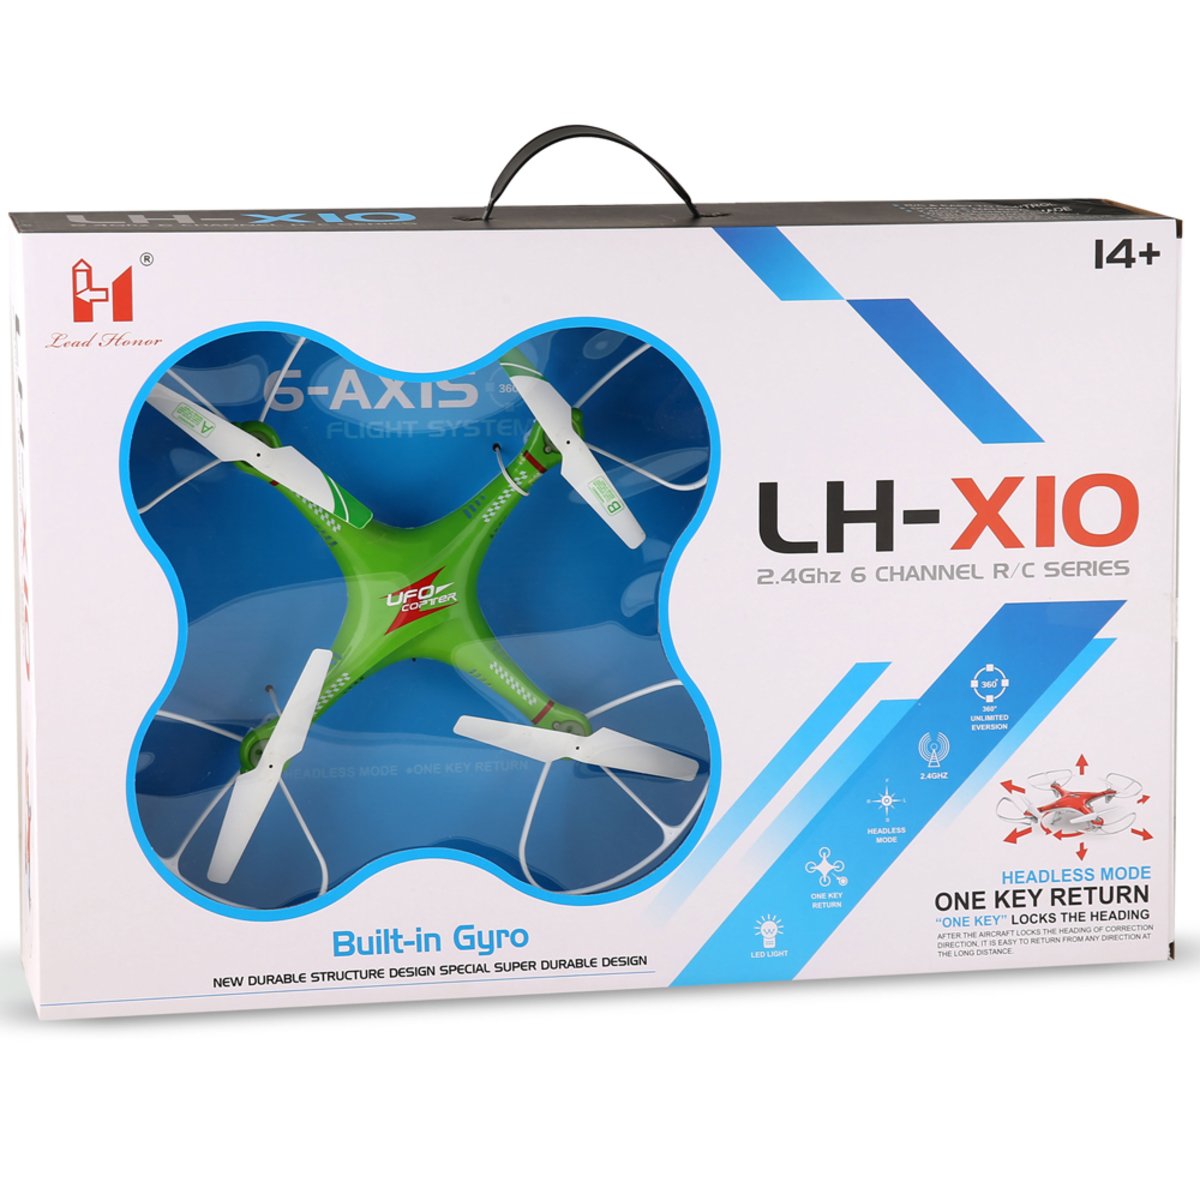 Ufo Drone Quadcopter with 6 Axis Gyro LH-X10